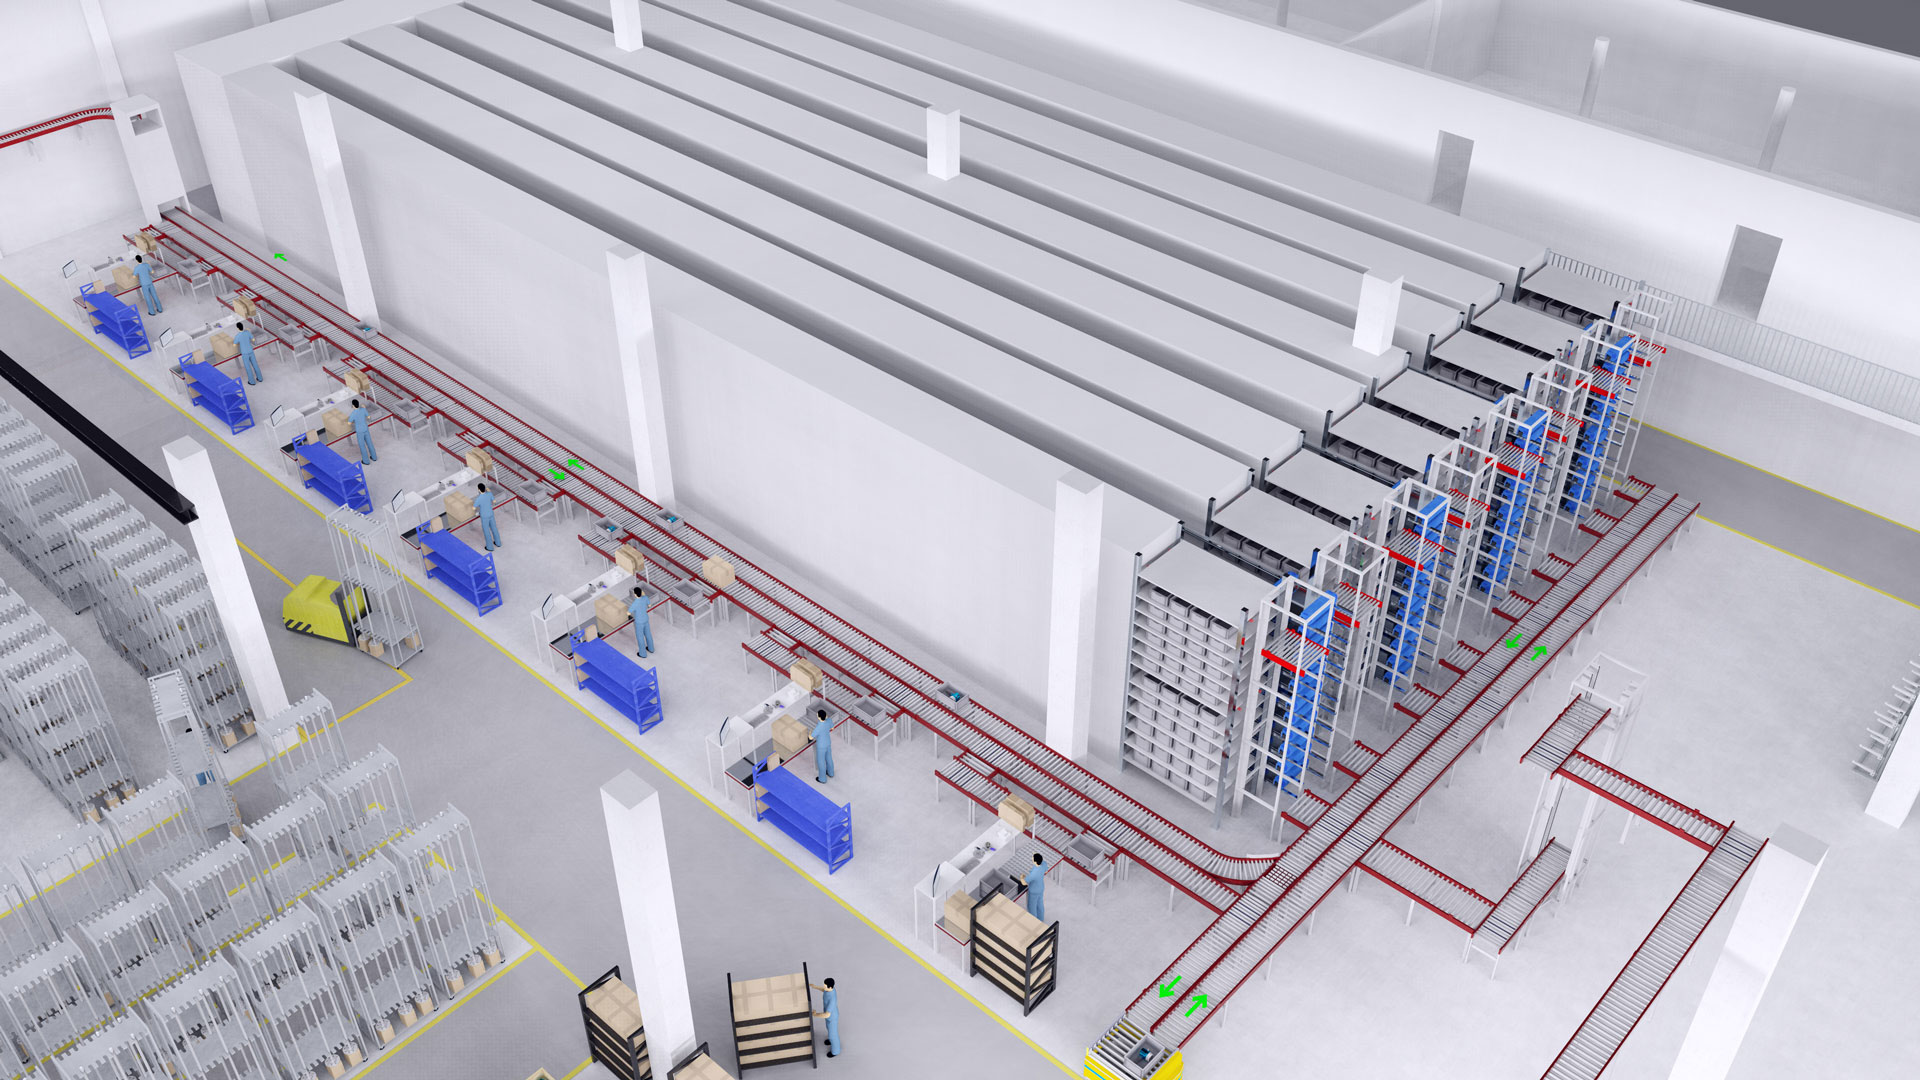 View into the new and animated route logic from Endress+Hauser